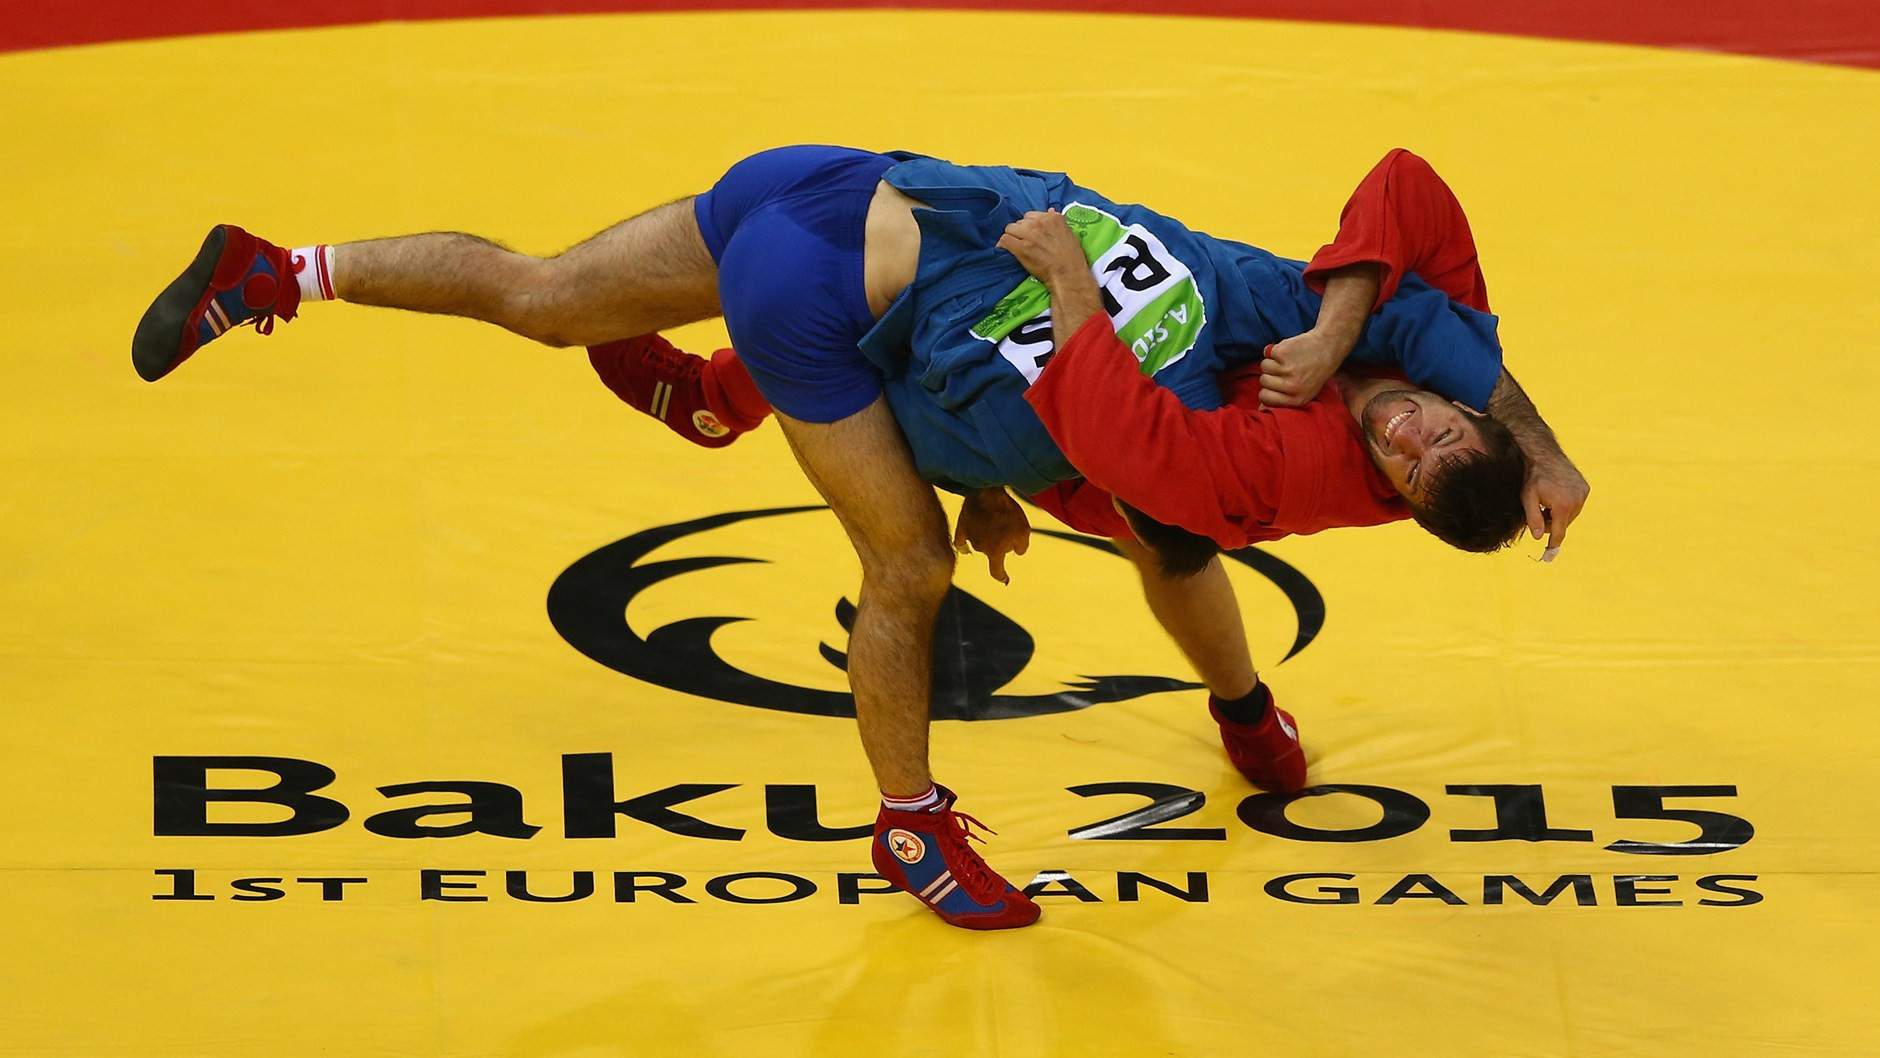 Stsiapan Papou, in red, won one of Belarus' two sambo gold medals at the 2015 European Games ©Getty Images